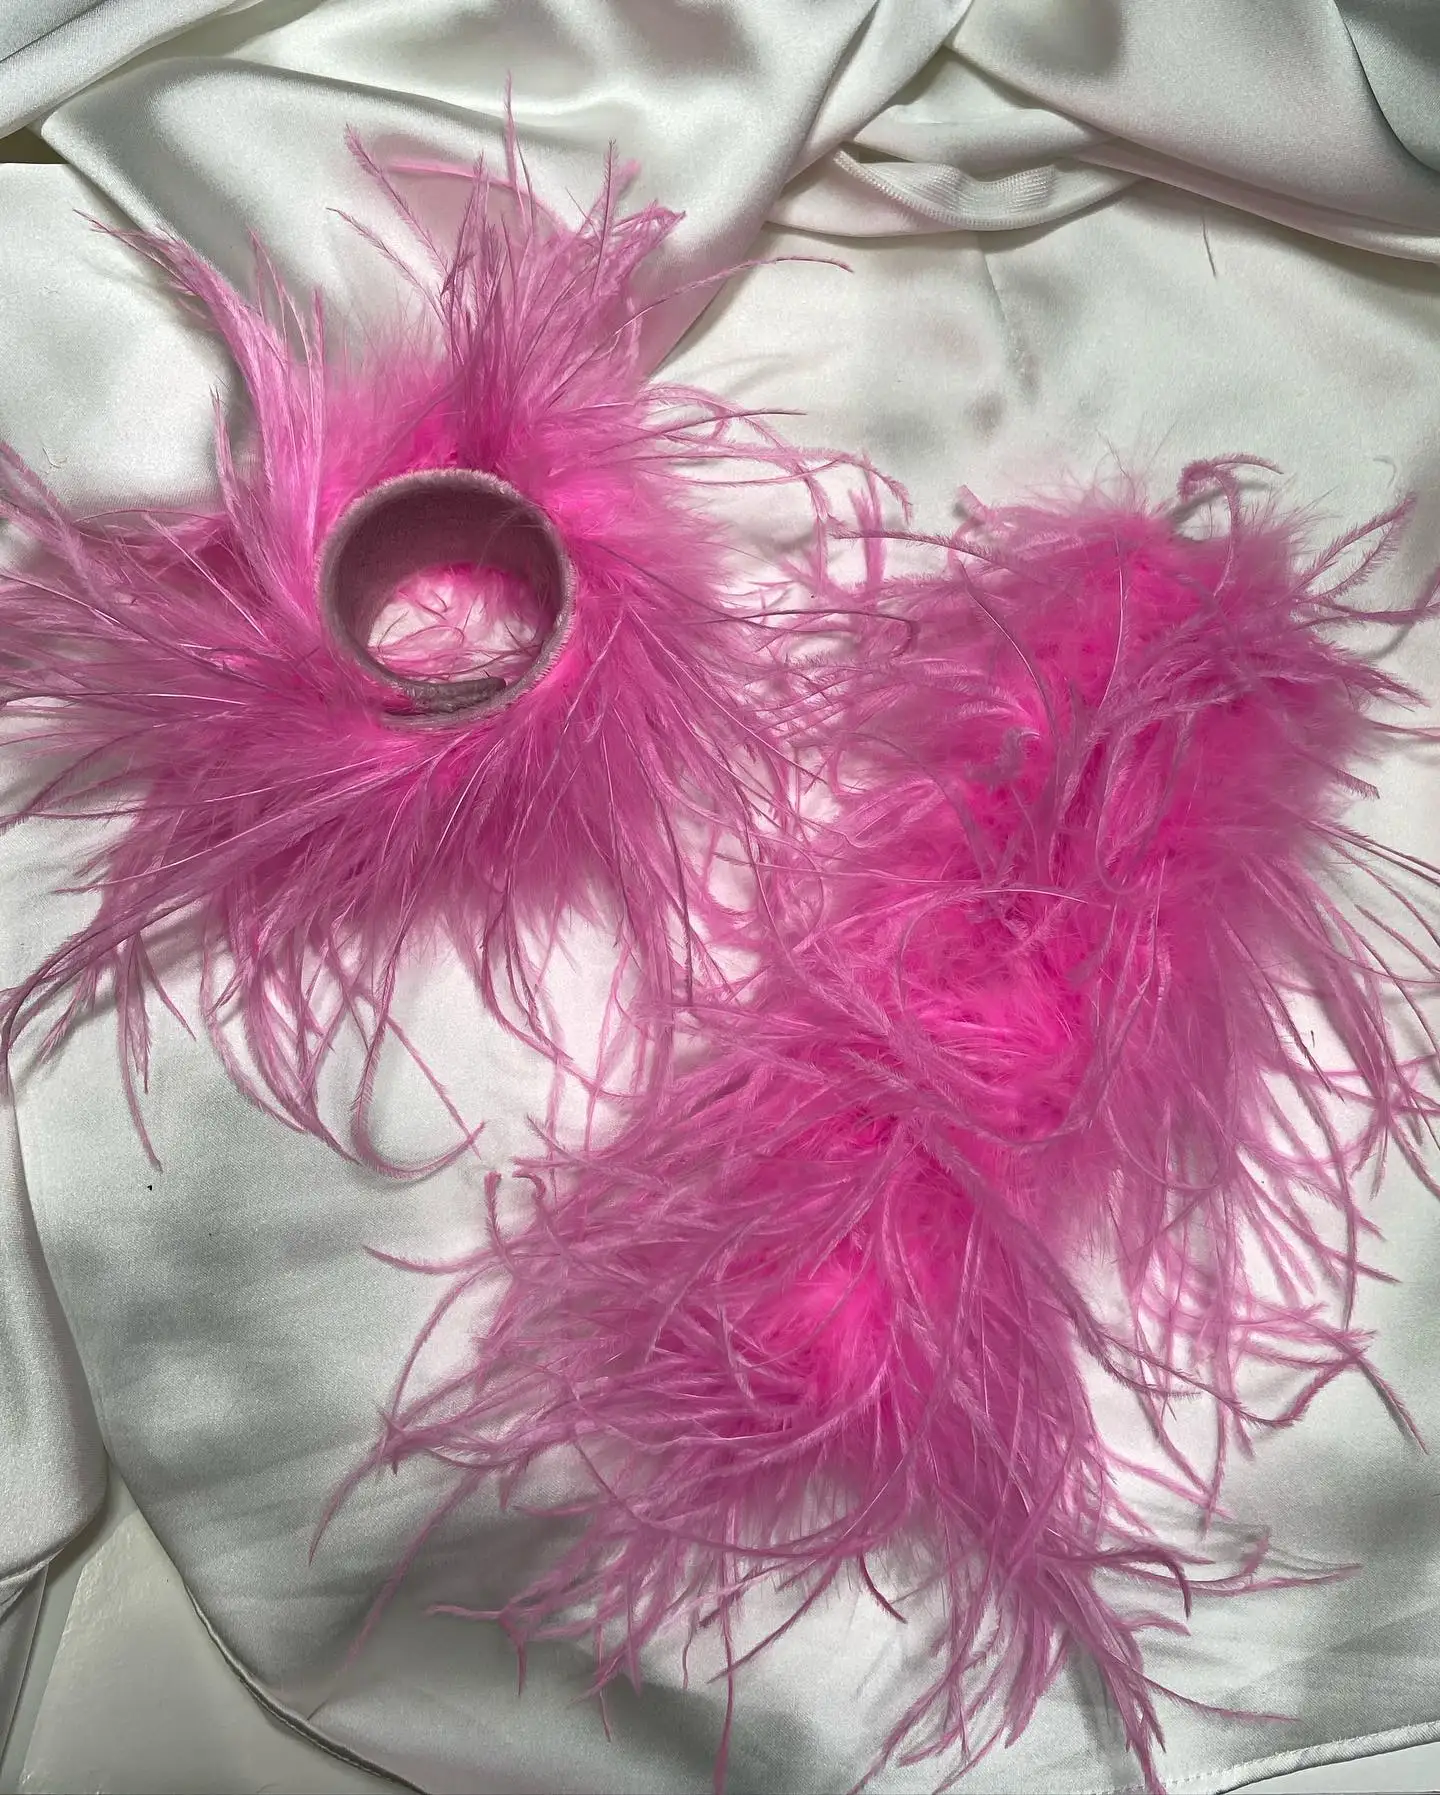 

Pink Ostrich Feather Cuffs 1Pair Feathers Snap Bracelet Feather Wrist Cuffs Fashion Ladies Custom wristband with Feathers